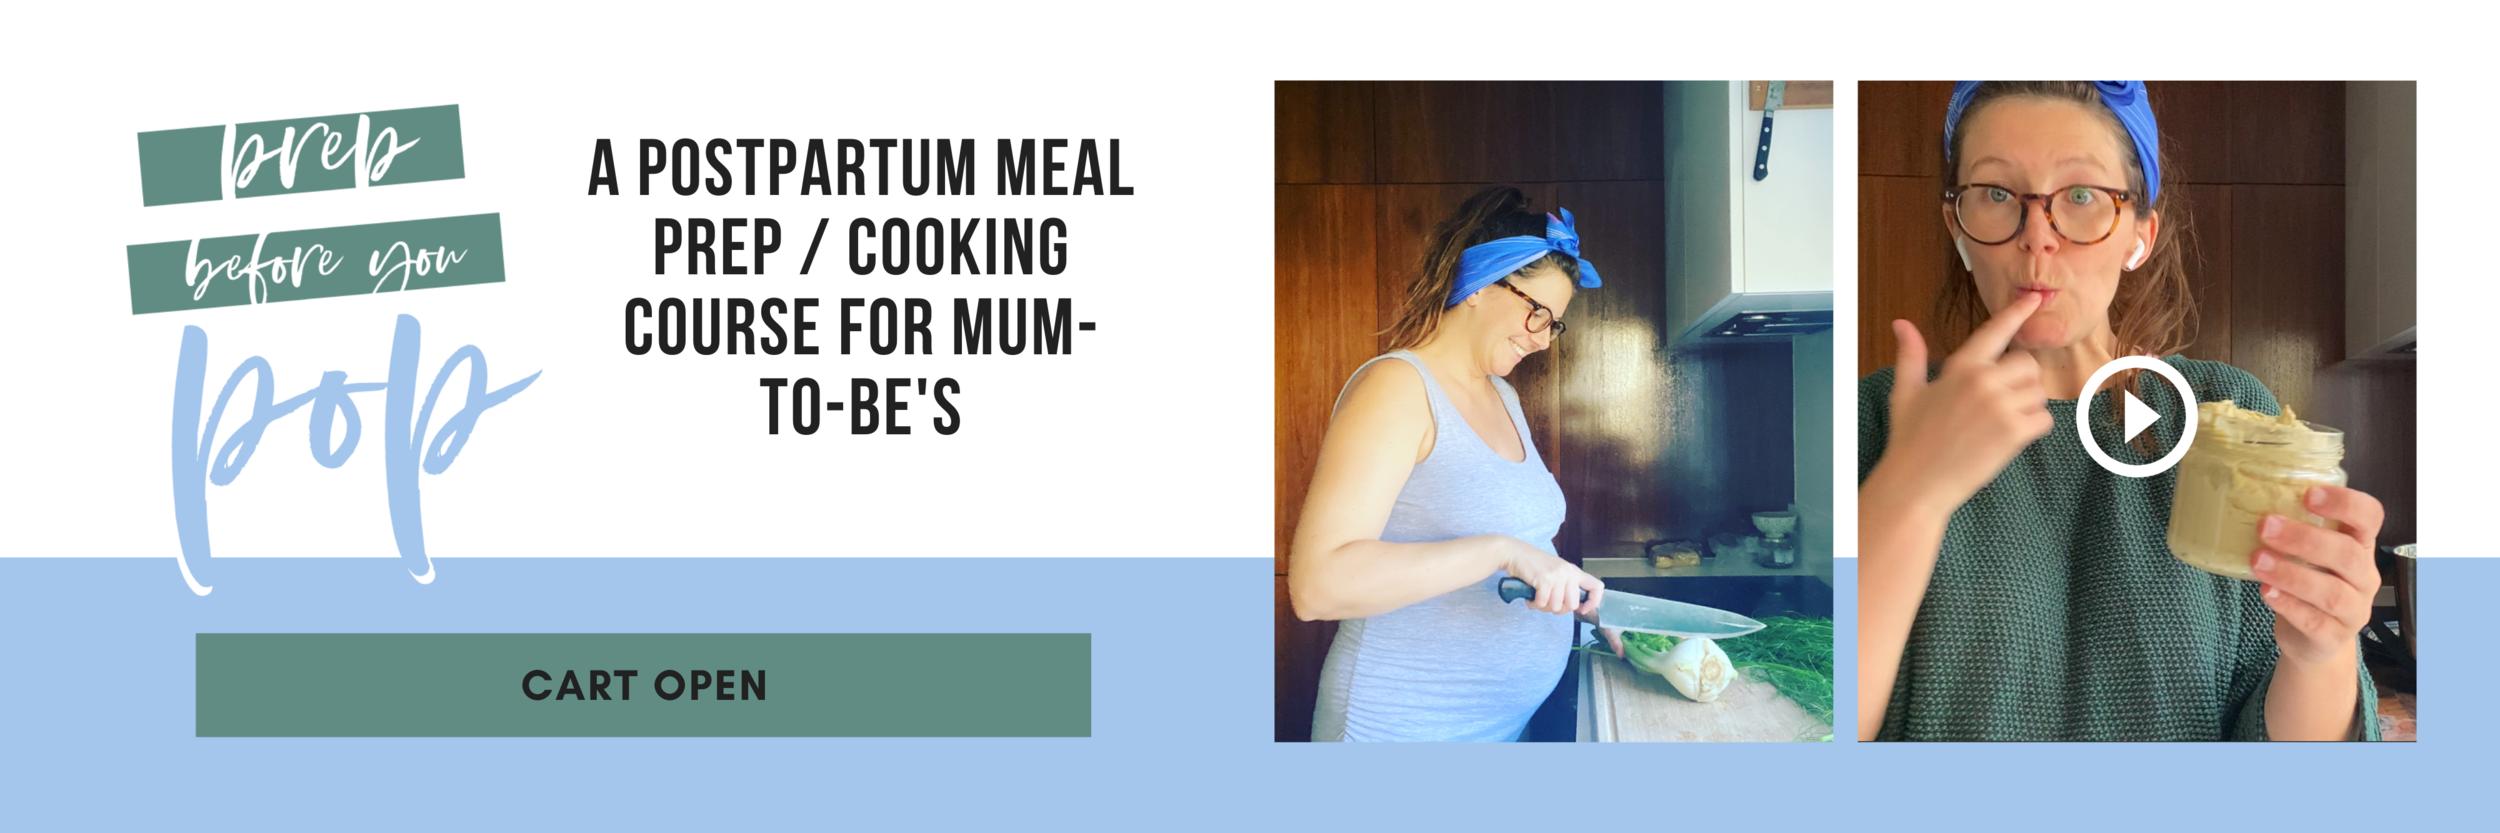 Prep-before-you-pop-pregnancy-postpartum-meals-lunch-lady-lou.png